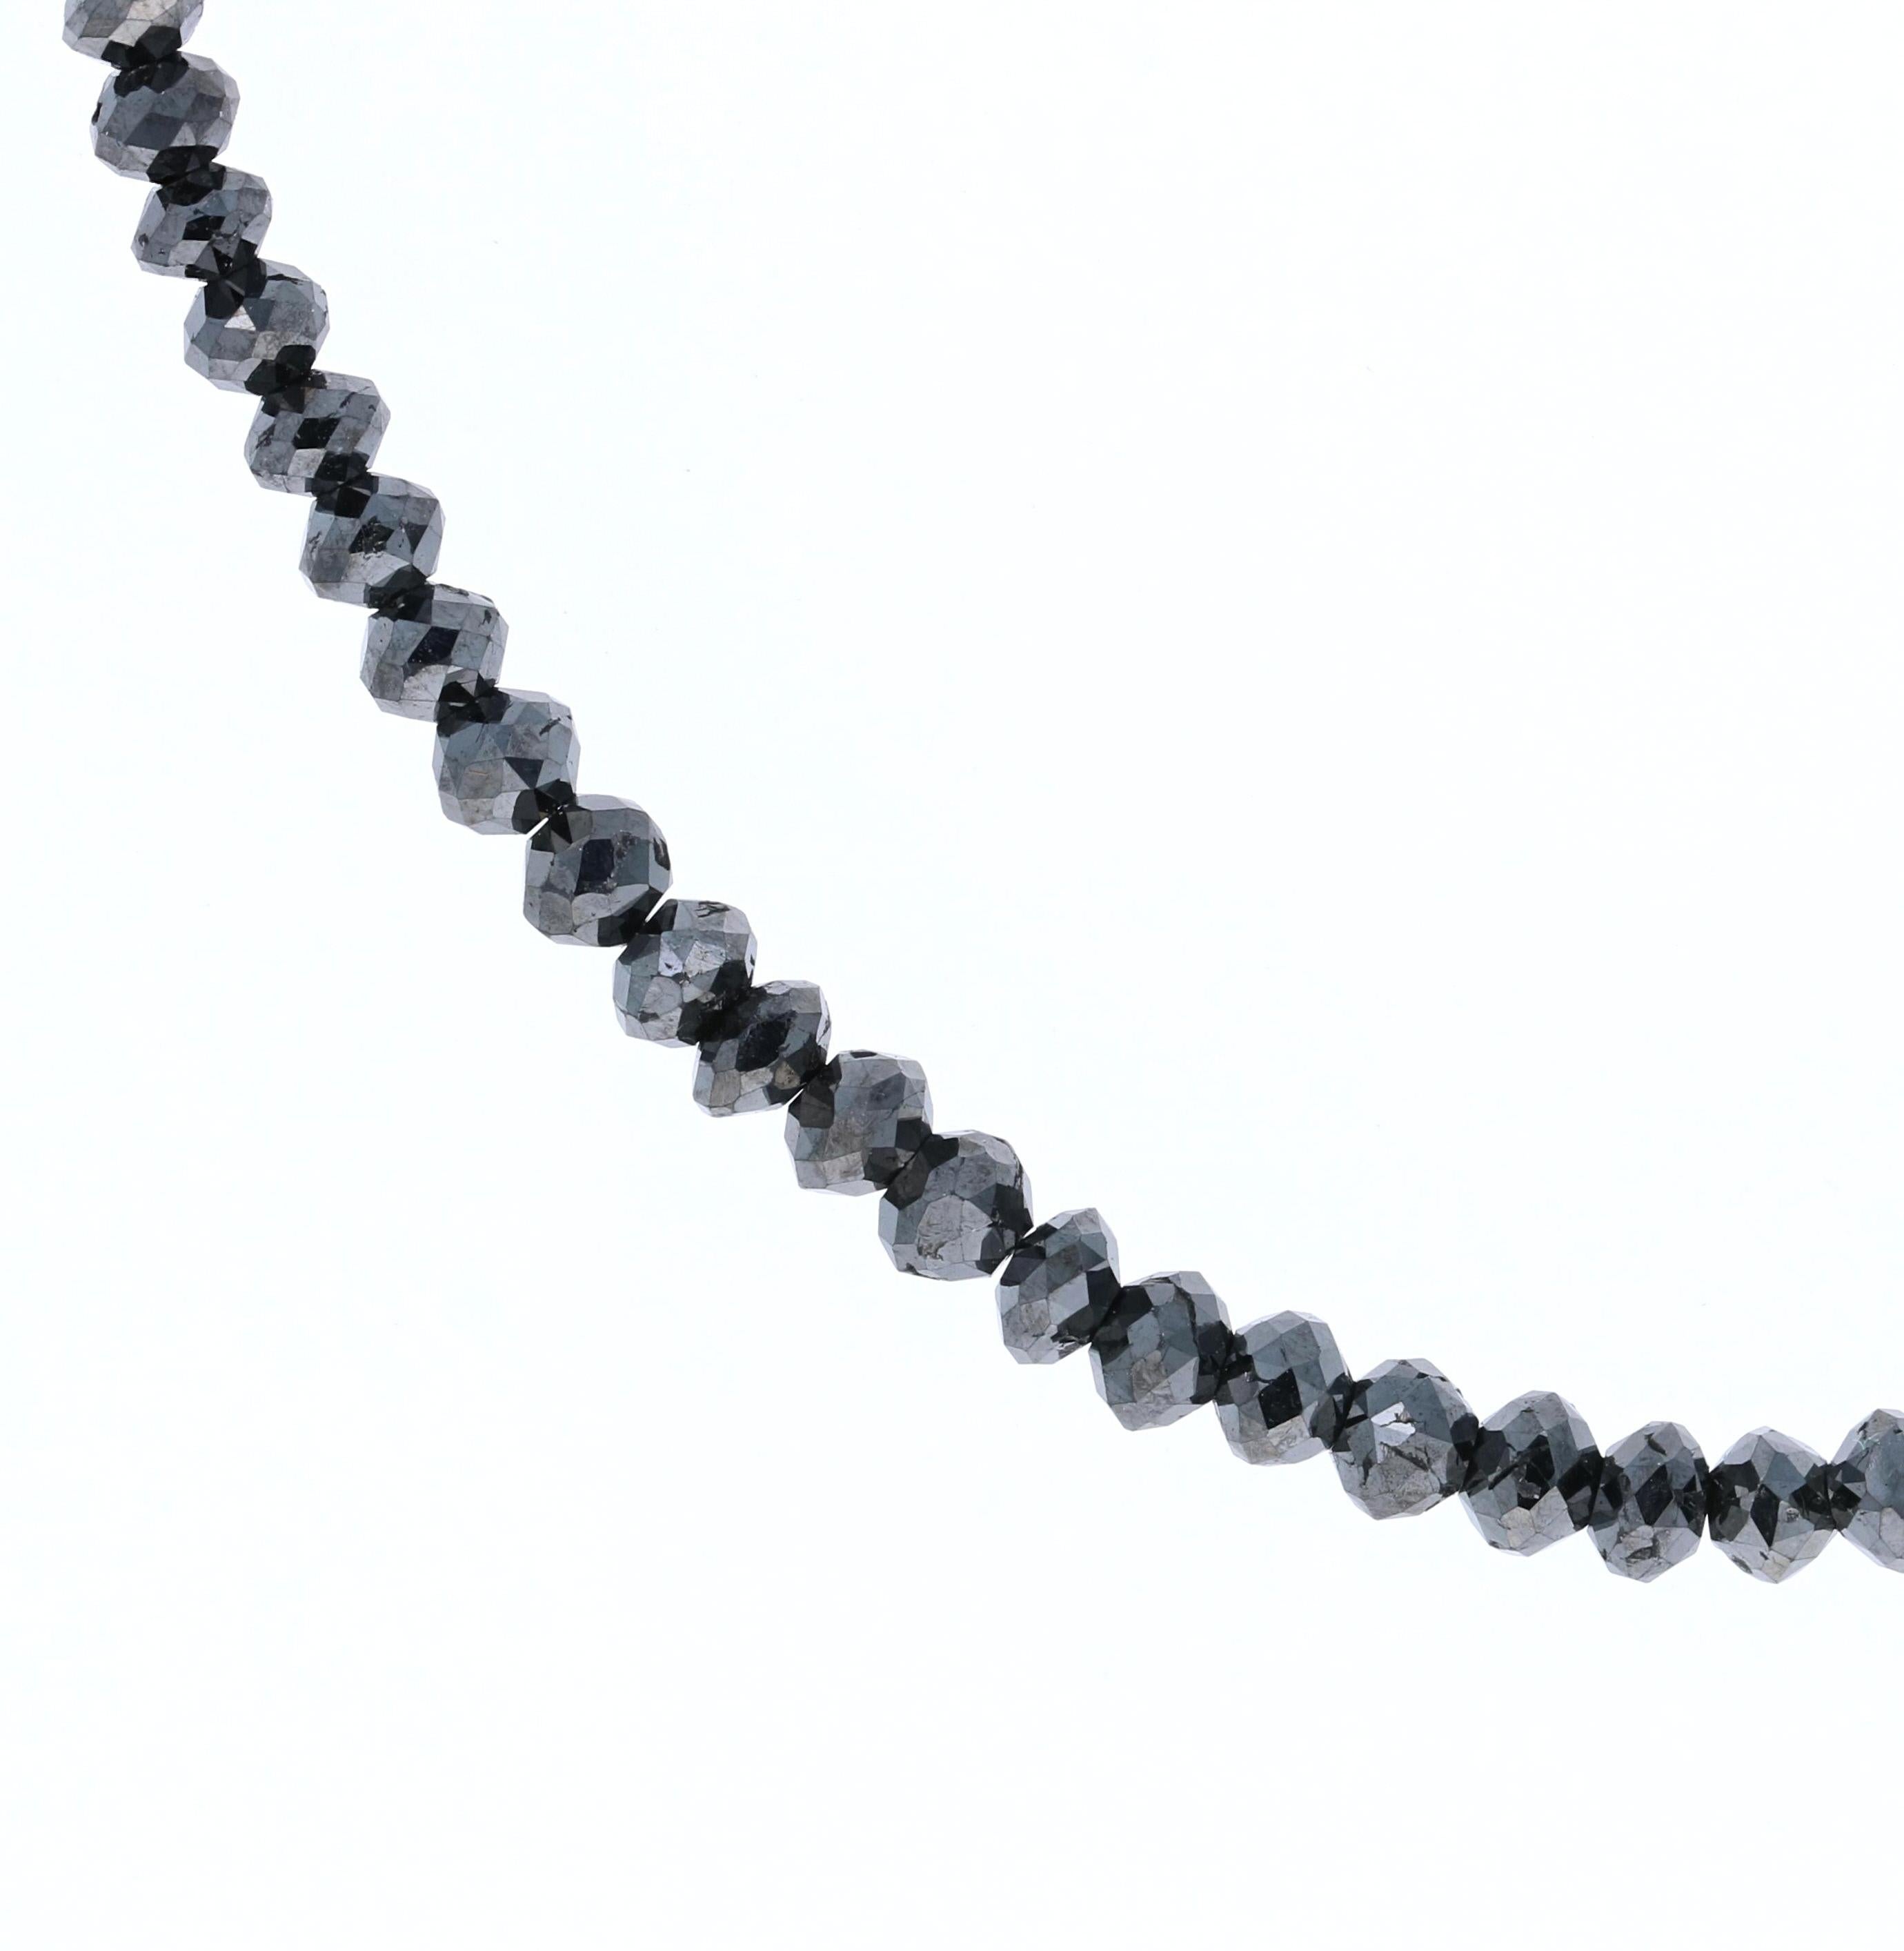 25.00 Carat Black Diamond Briolette Bead Necklace in 18K White Gold.
This stunning black diamond necklace can enhance any pendant or charm and take it to the next level! 
These are natural diamonds that have been color treated to give them the deep